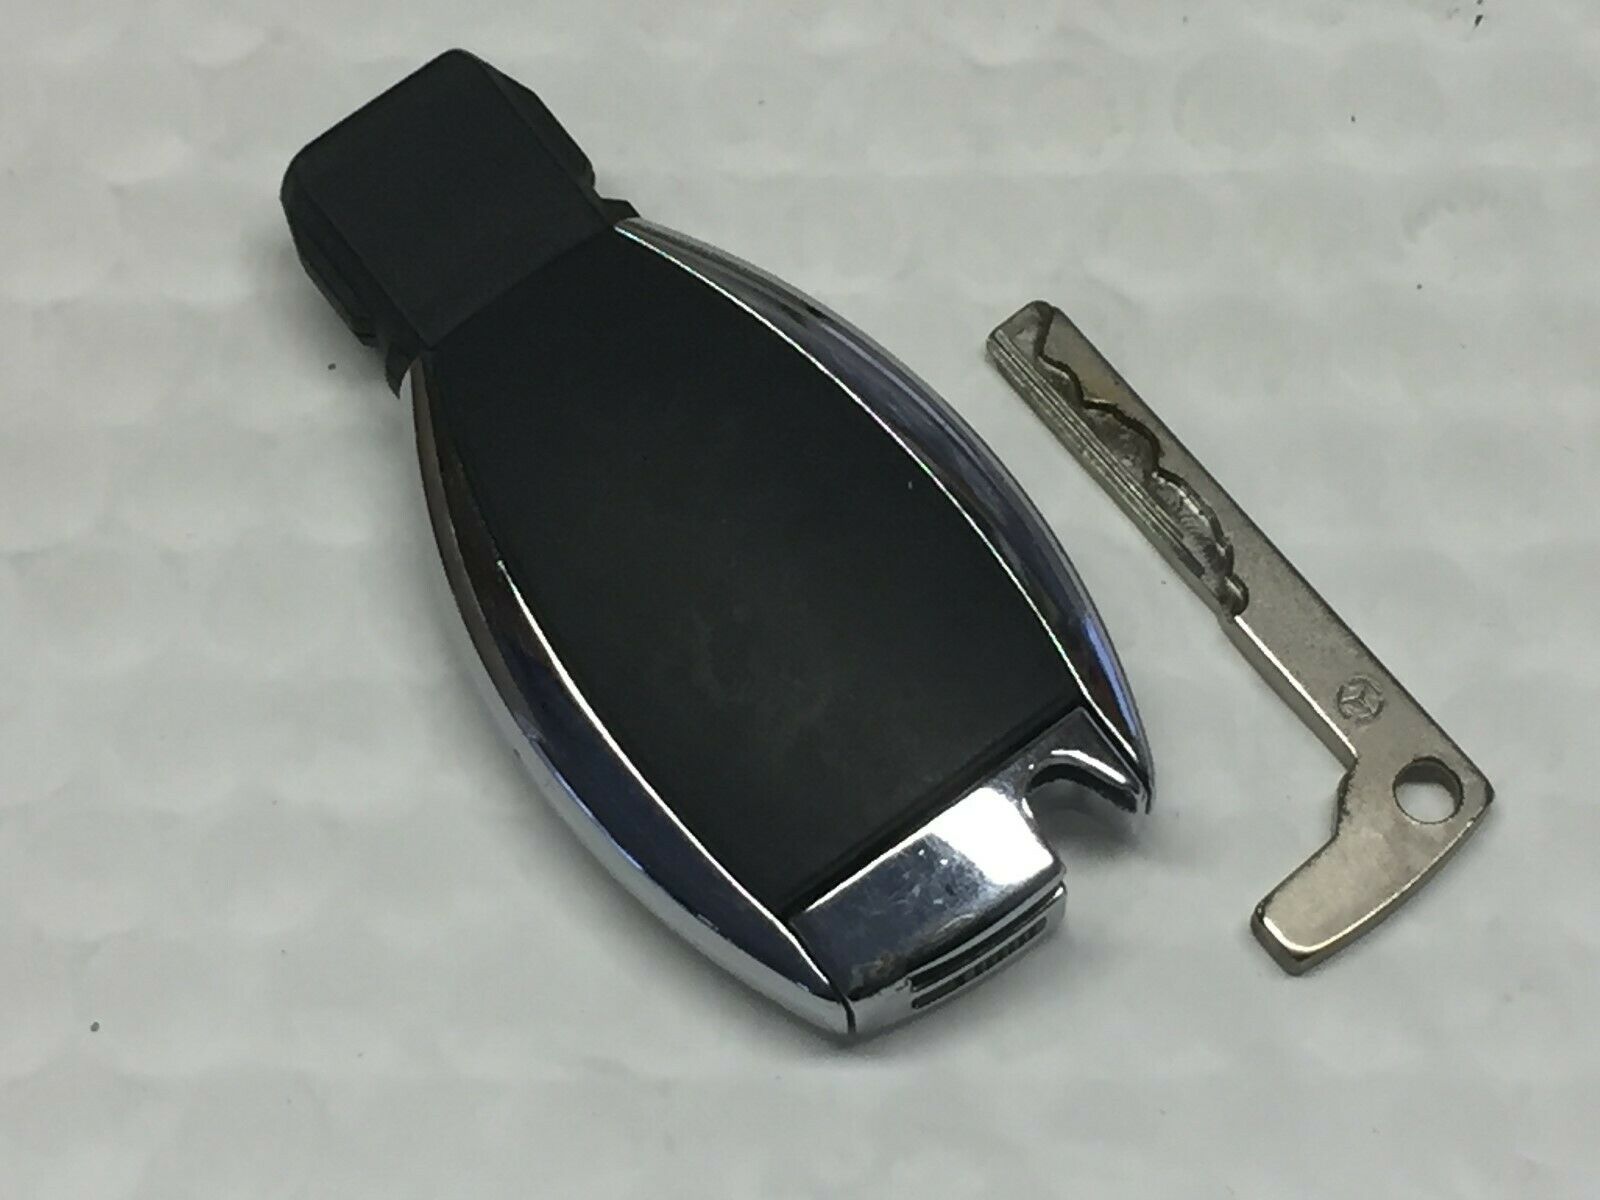 2019 Mercedes-Benz  Keyless Entry Remote Iyzdc10 4 Buttons - Oemusedautoparts1.com